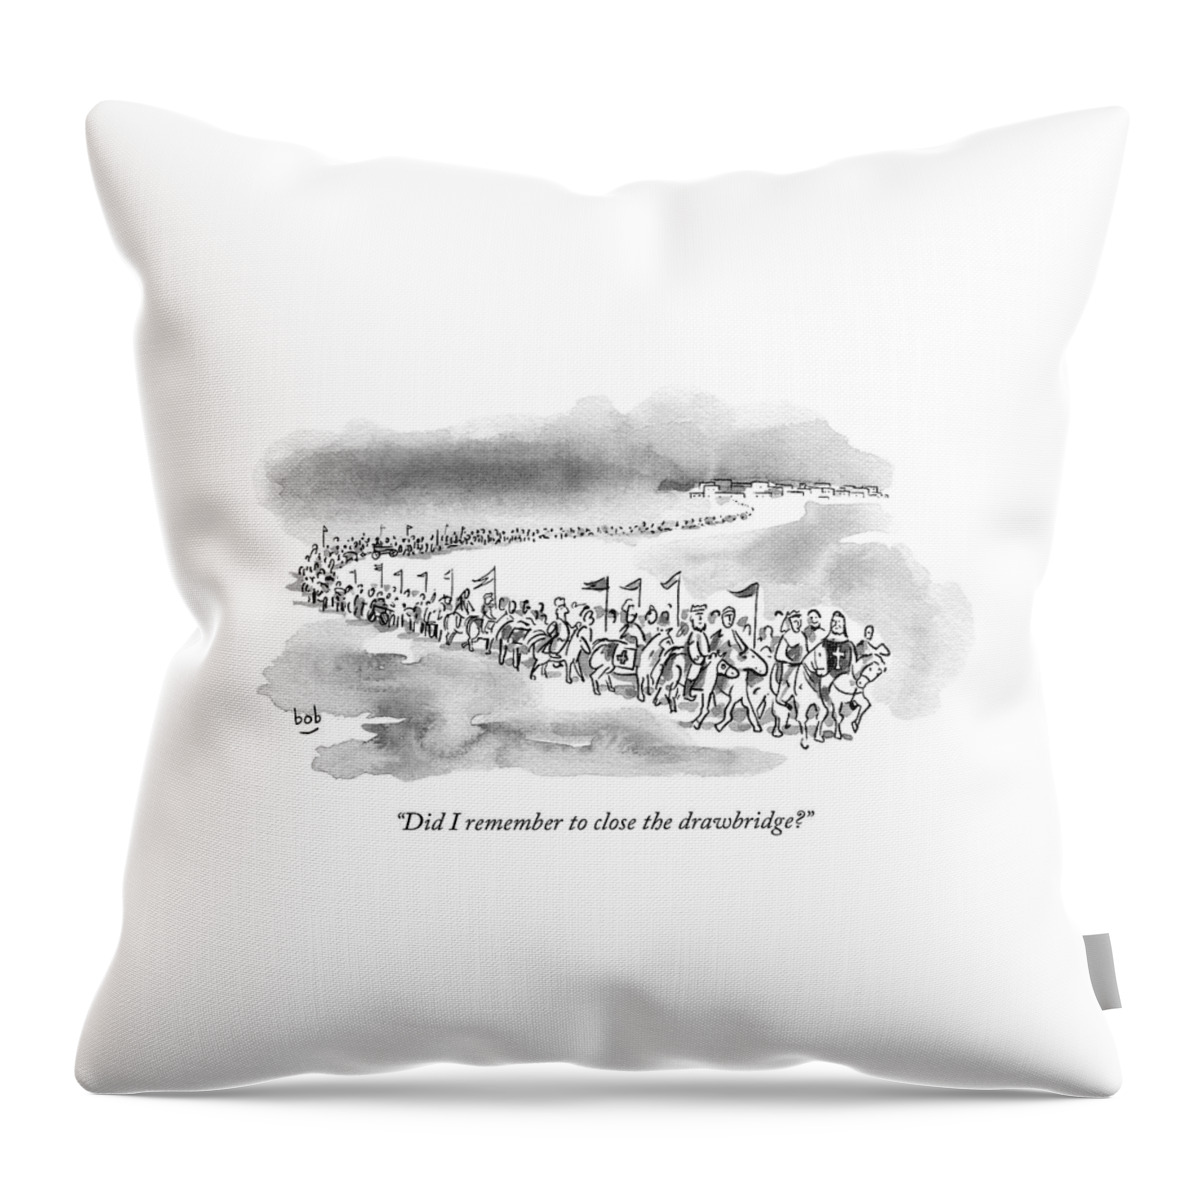 At The Front Of A Marching Army On Horseback Throw Pillow